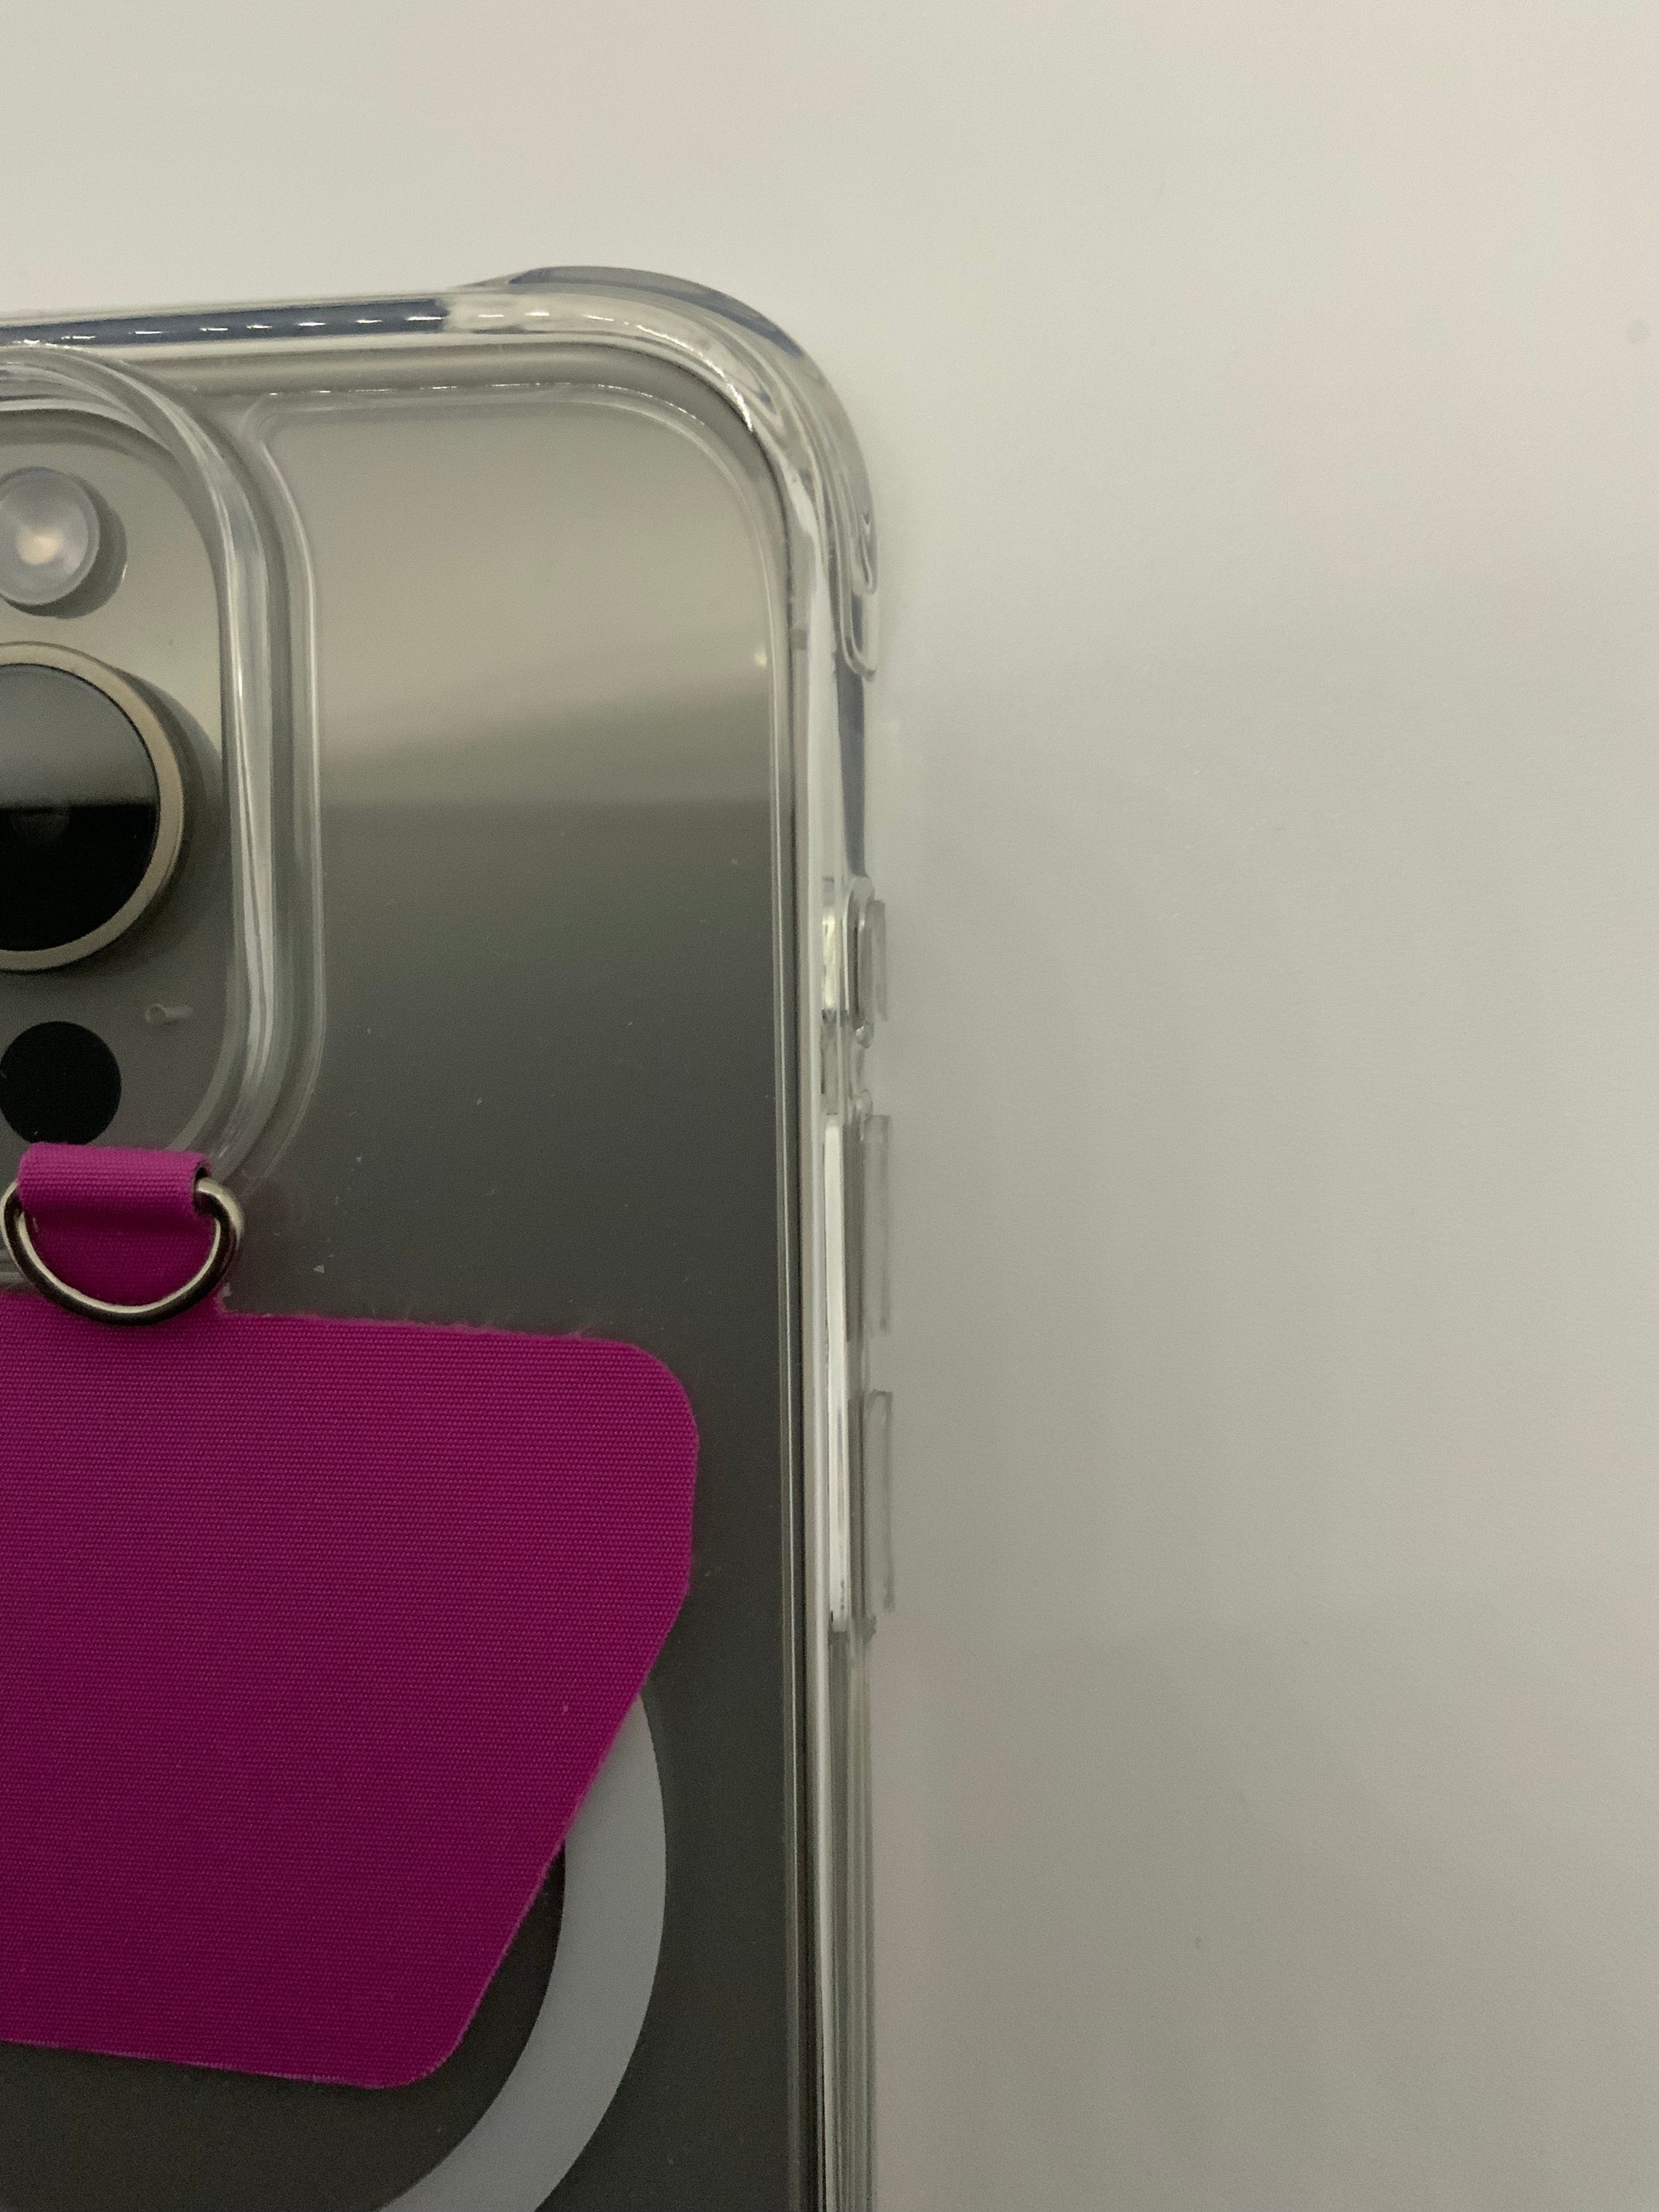 Be My AI: The picture shows a close-up of the corner of a clear phone case that is on a phone. The phone case has a transparent, plastic material and you can see the side of the phone through it. The phone has a camera in the top left corner. There is also a purple tag with a metal ring attached to the back of the phone, which is visible through the clear case. The background is plain and white.